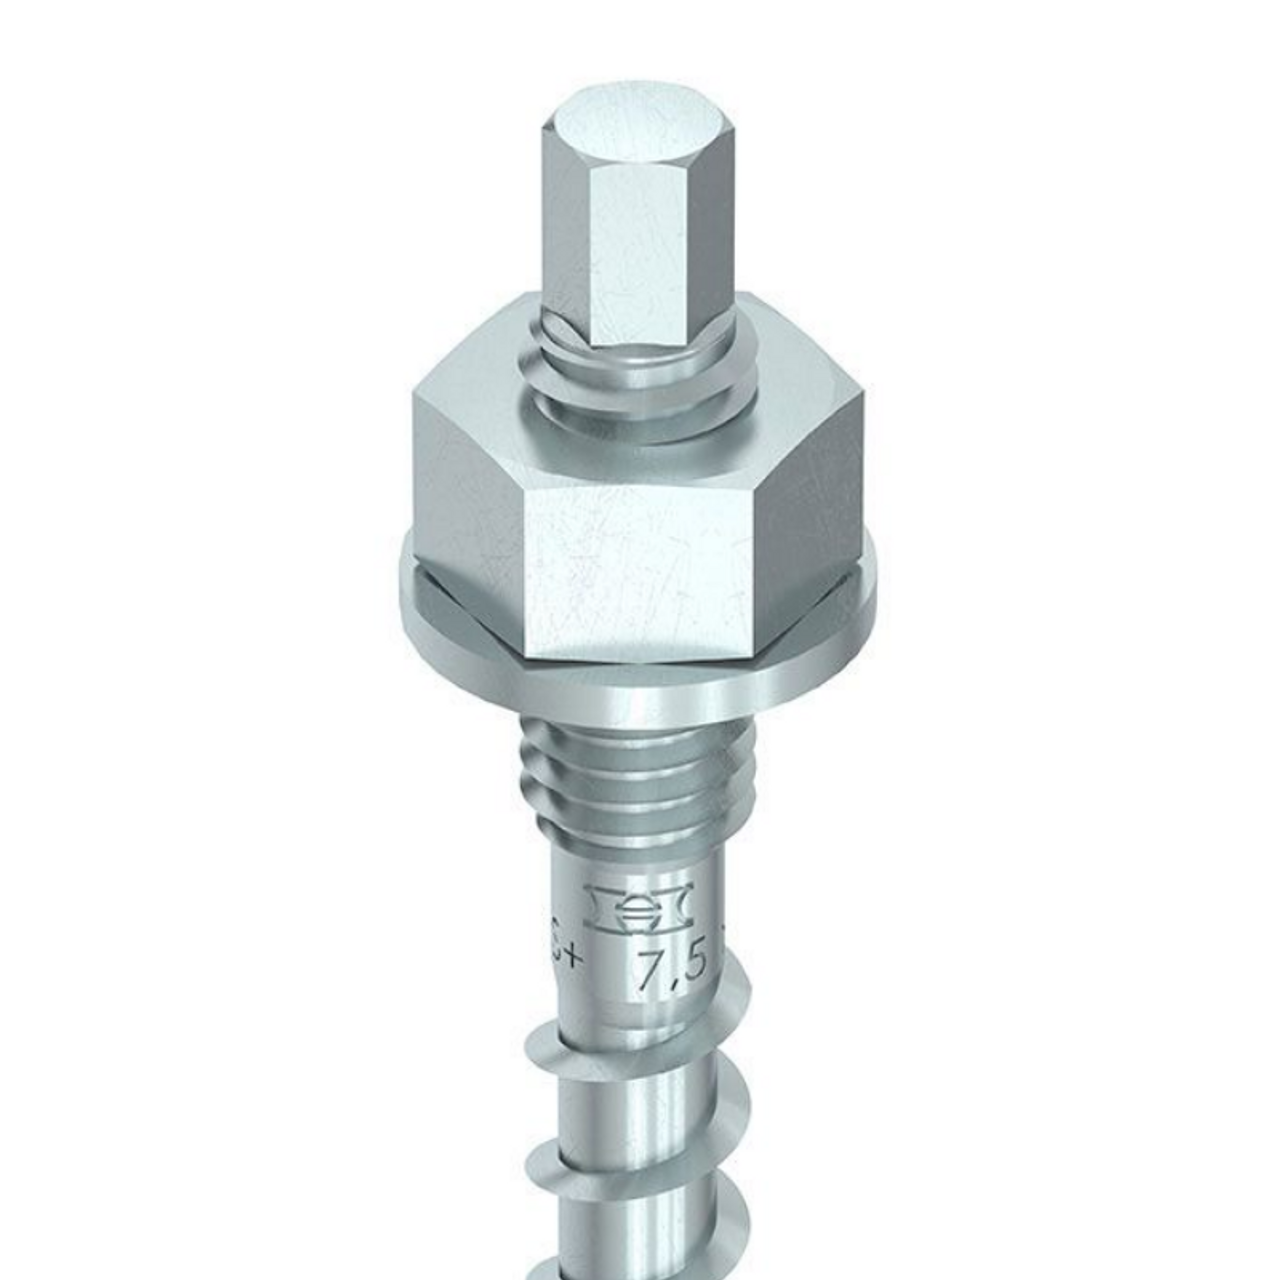 Craftsman Hardware, has a tools store where you can find Pre-Set Threaded Screw Anchor such as HECO 20mm Silver Zinc Pre-Set Threaded Screw Anchor for the Construction Industry in Australia and New Zealand